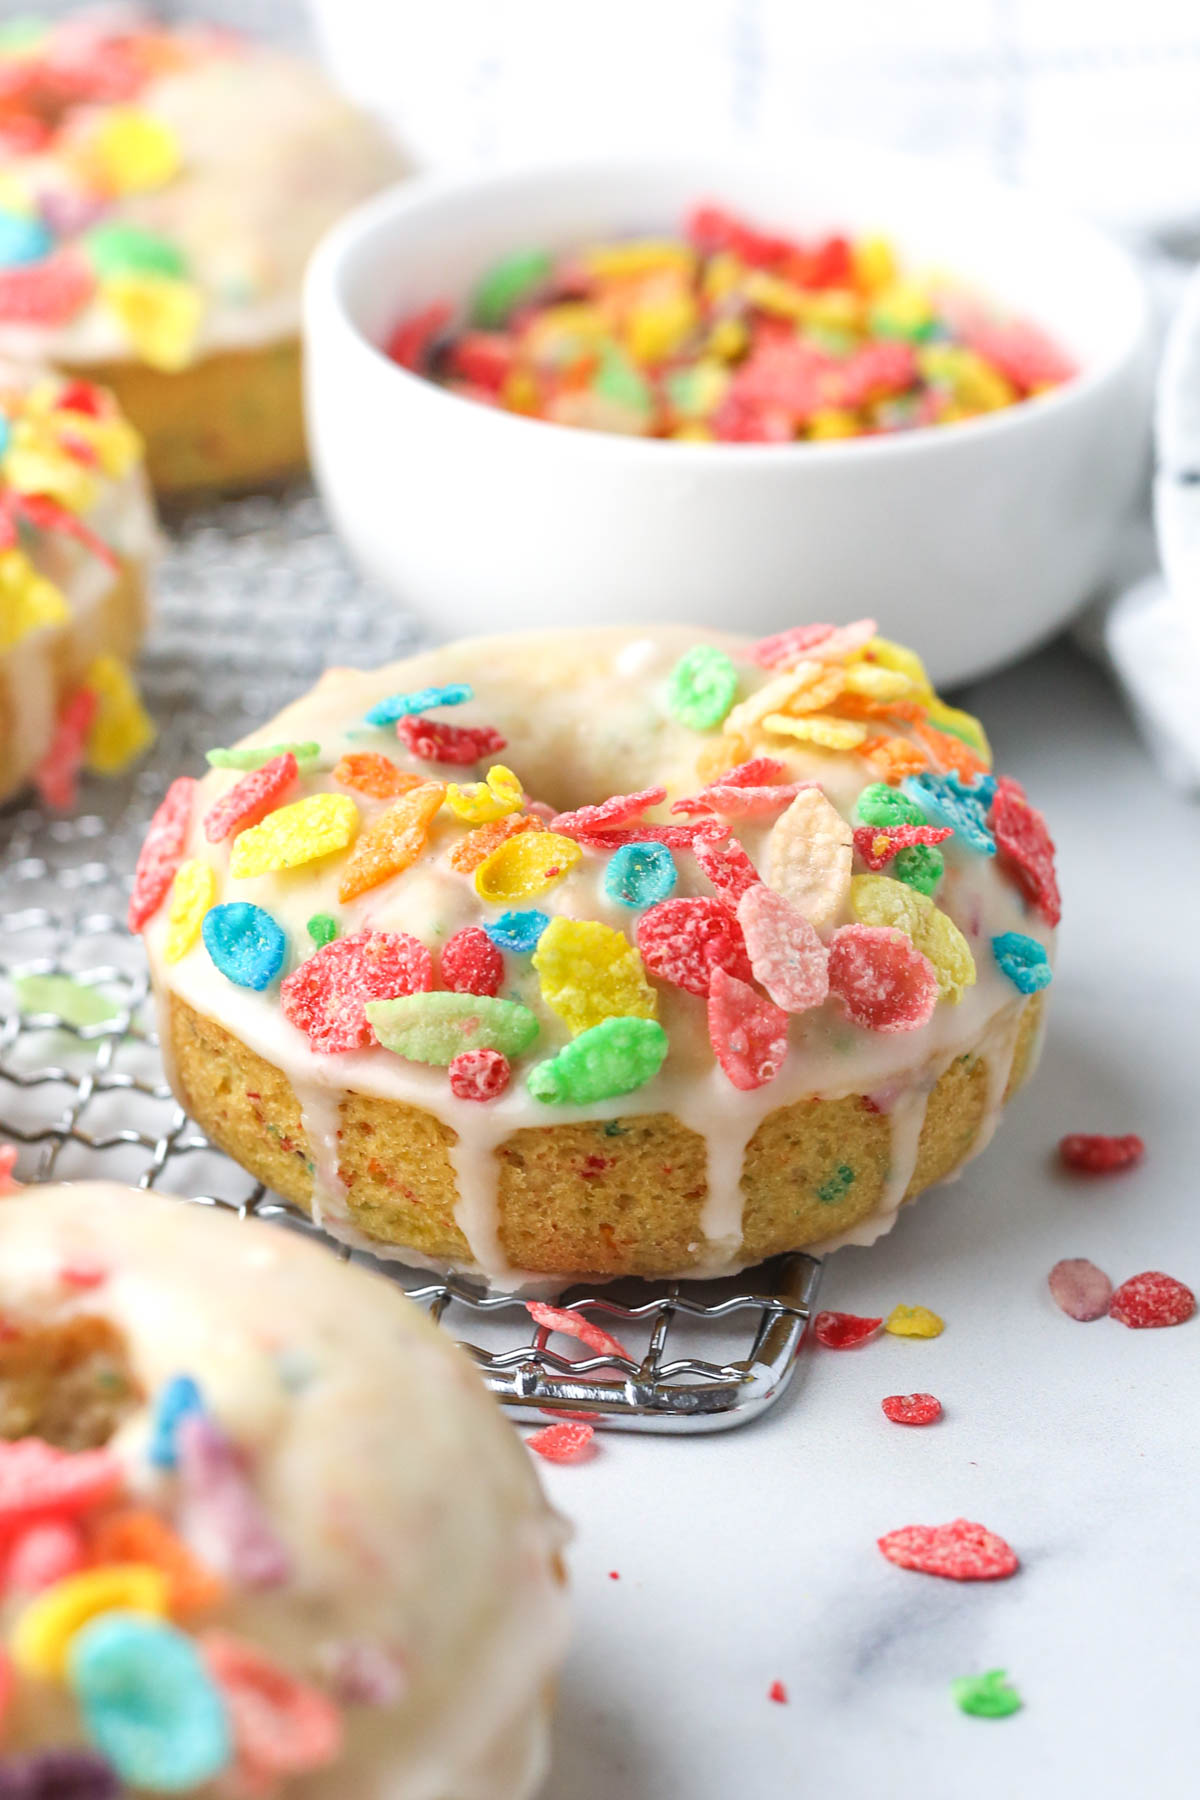 Side view of a donut with icing dripping down the edges and fruity pebbles on top.